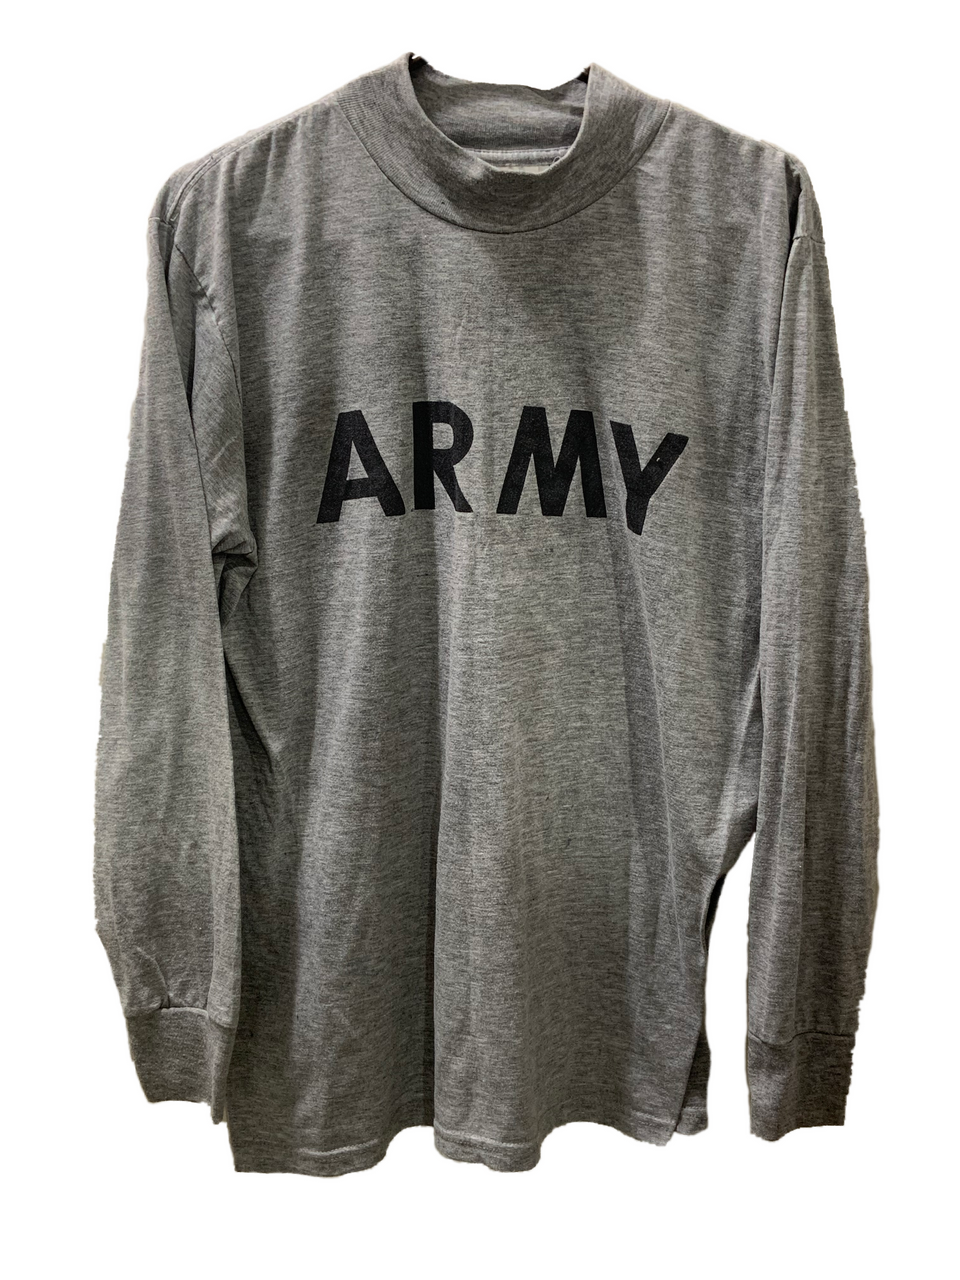 Original Military Grey Army PT Shirt Long Sleeve Physical Training Tee Old School Made in USA - SGT